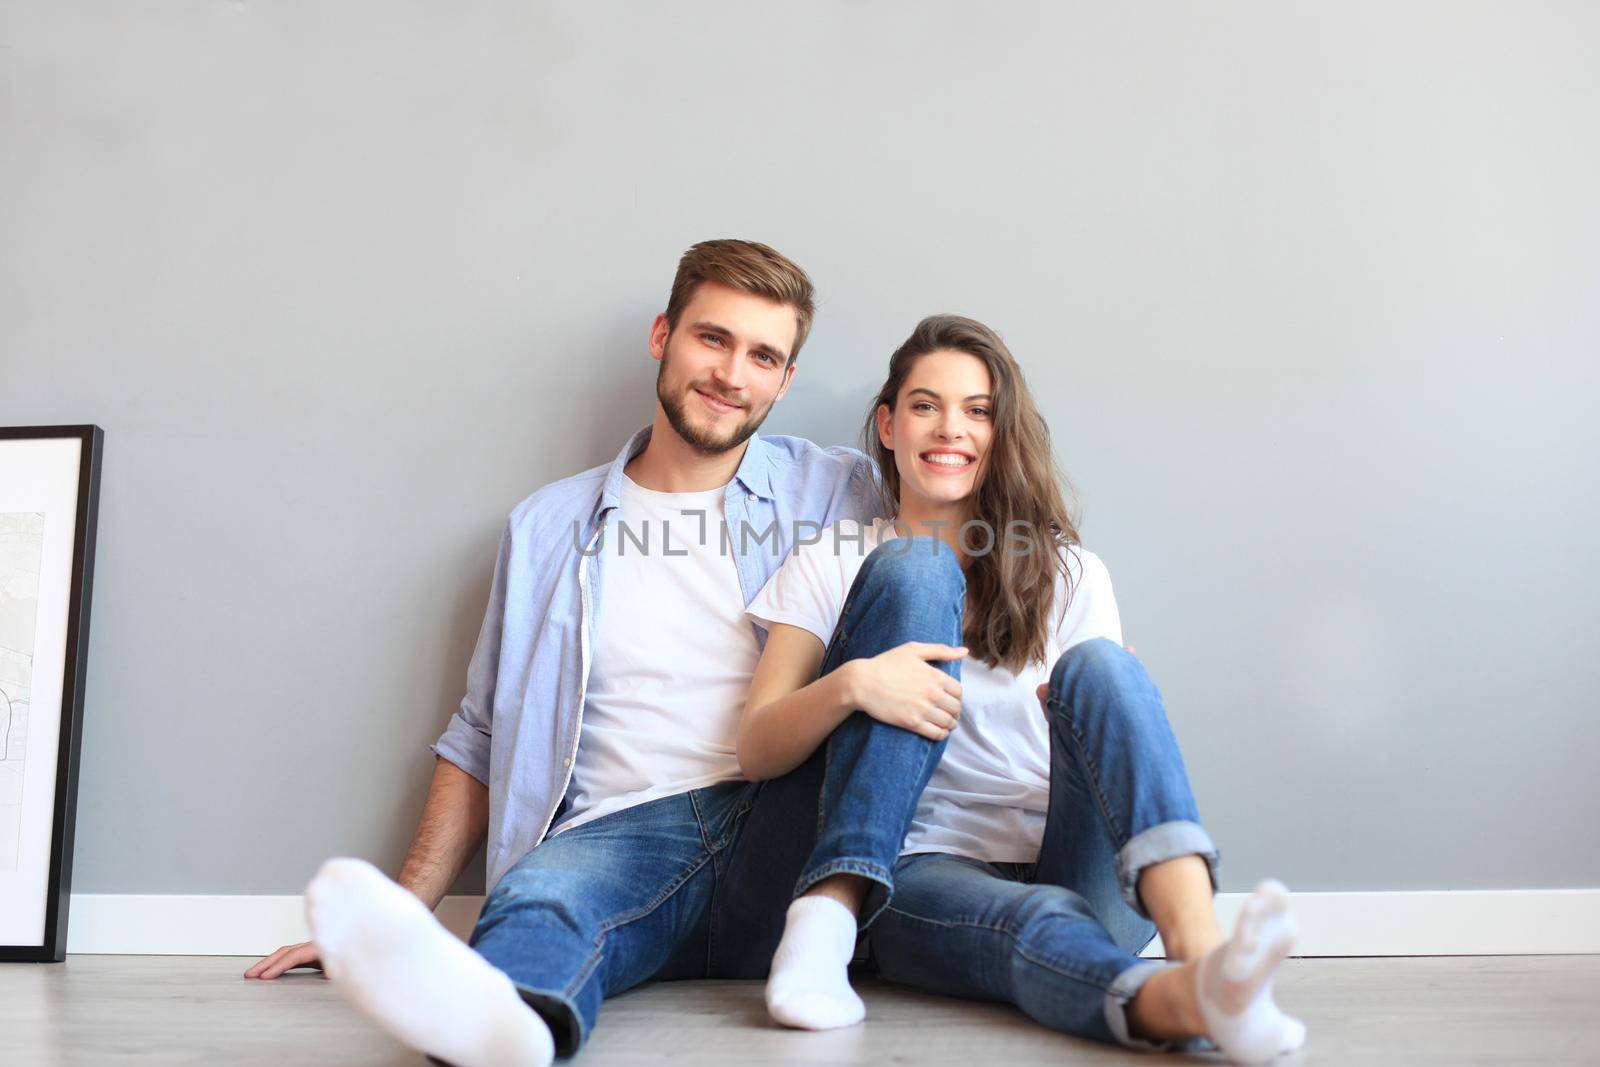 The happy couple sitting on the background of the gray wall